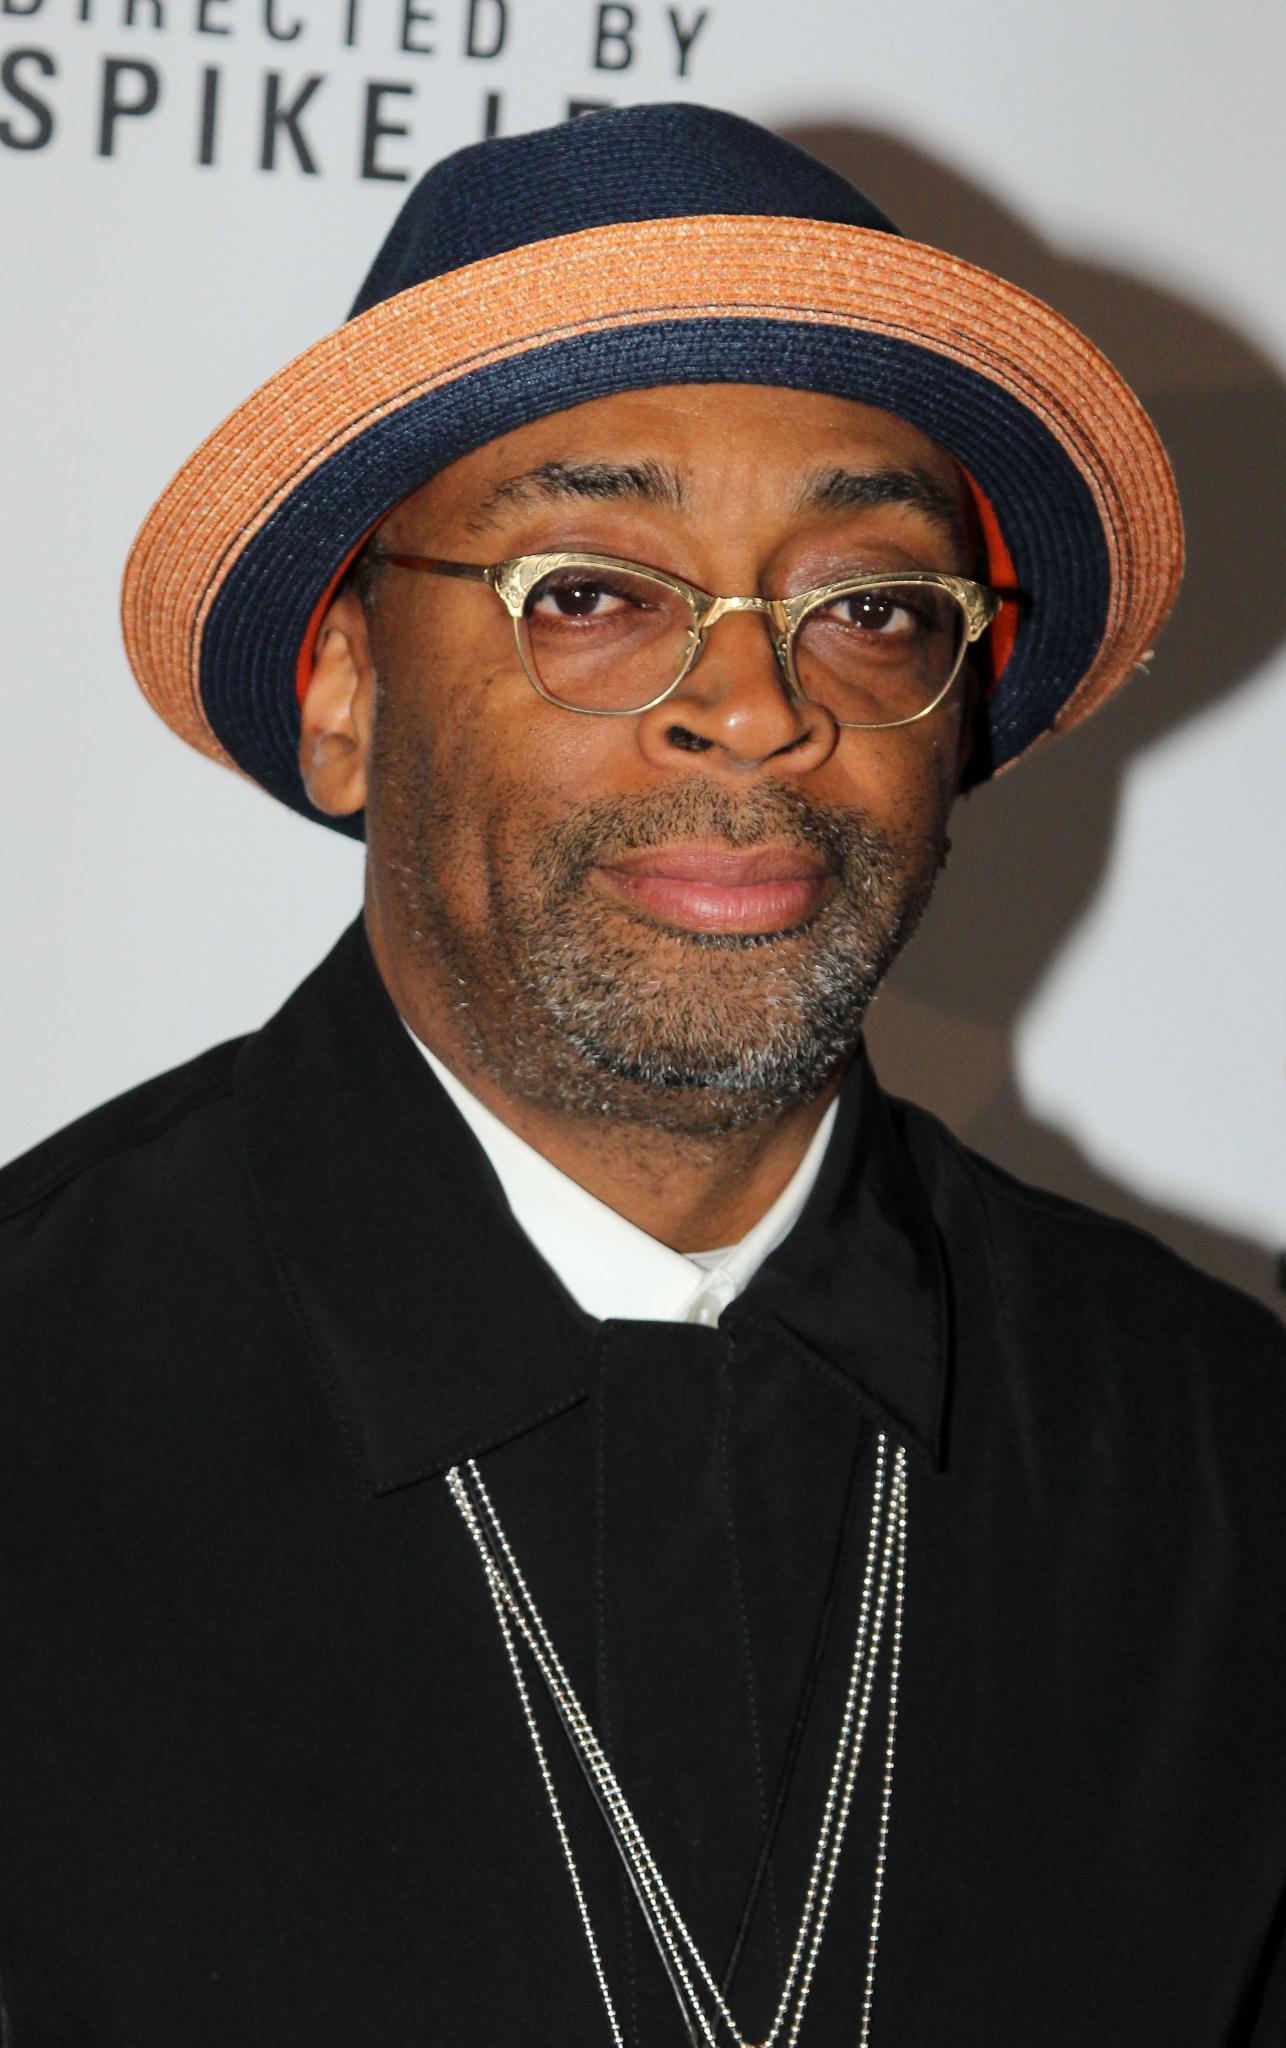 Coffee Talk: Spike Lee to Adapt ‘She’s Gotta Have It’ for Showtime